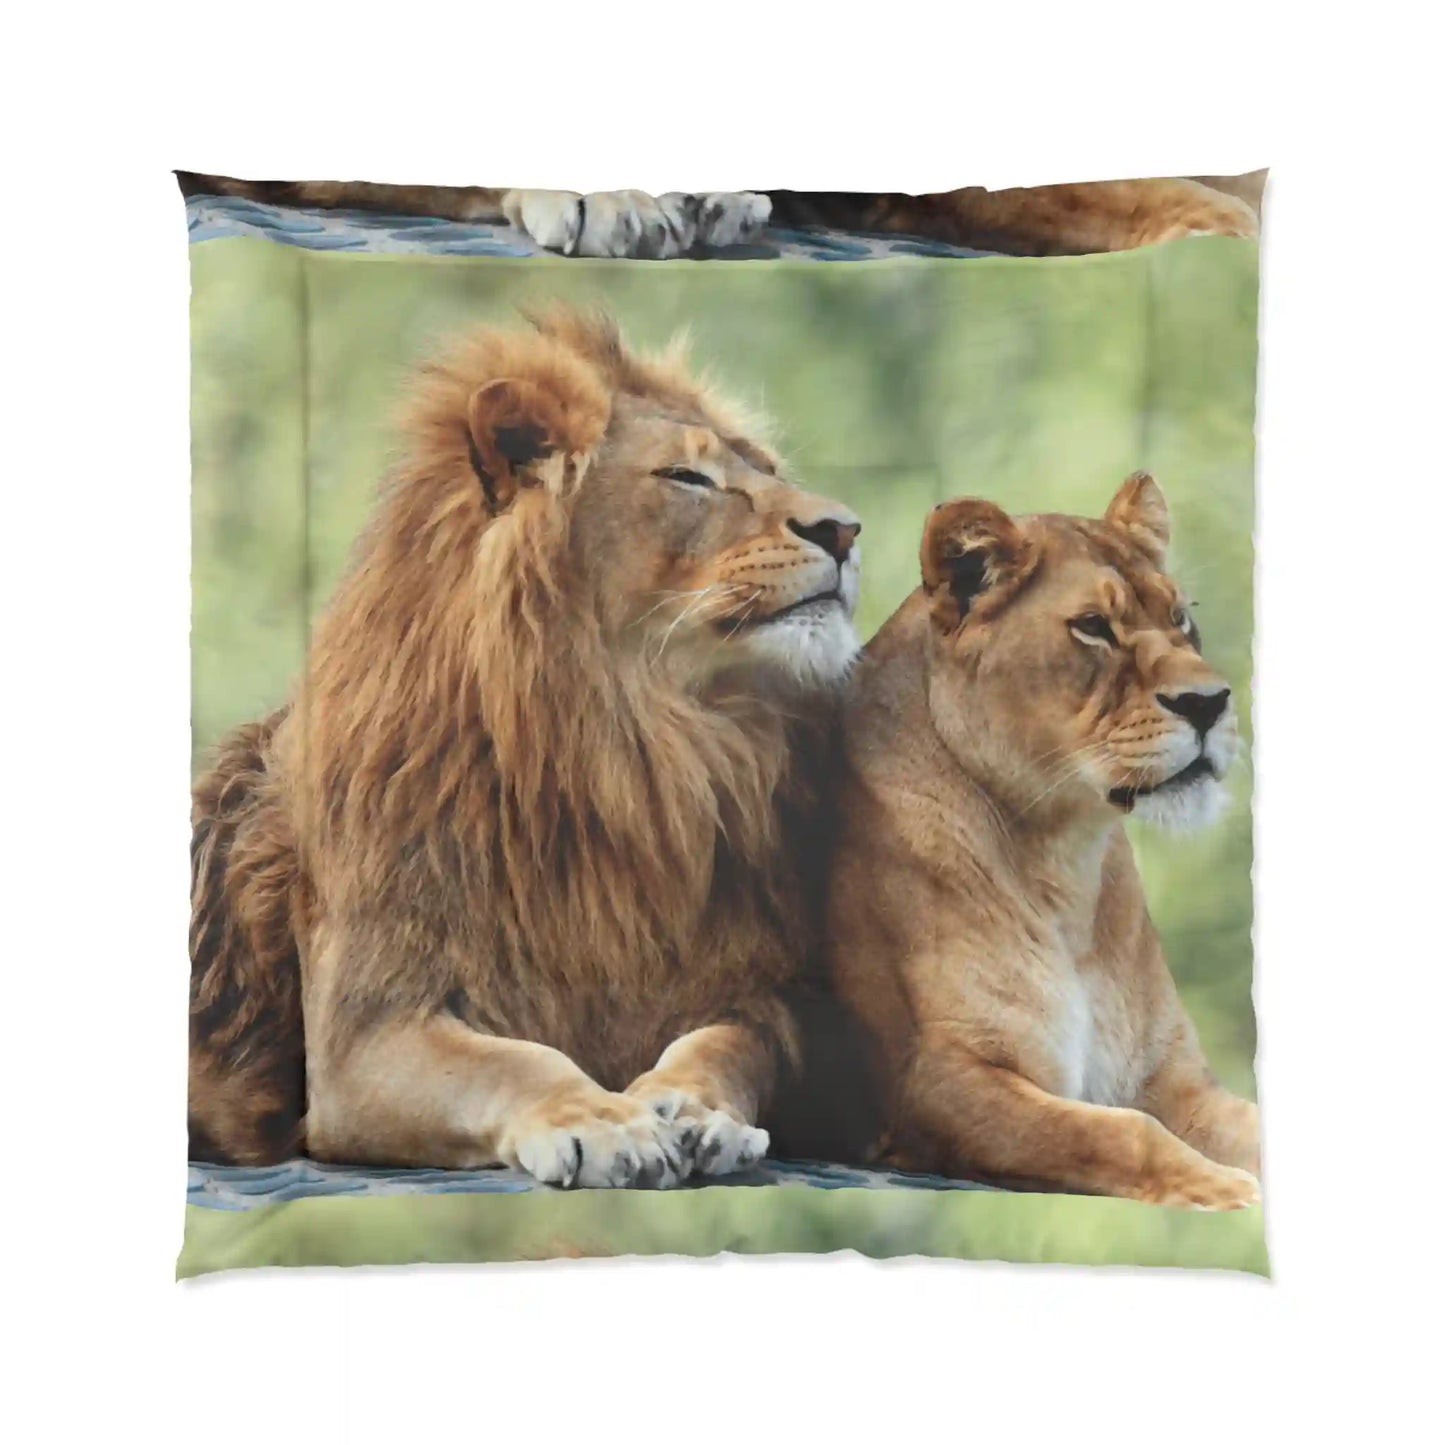 Comforter, quilting, laying, bed quilt (Lions)